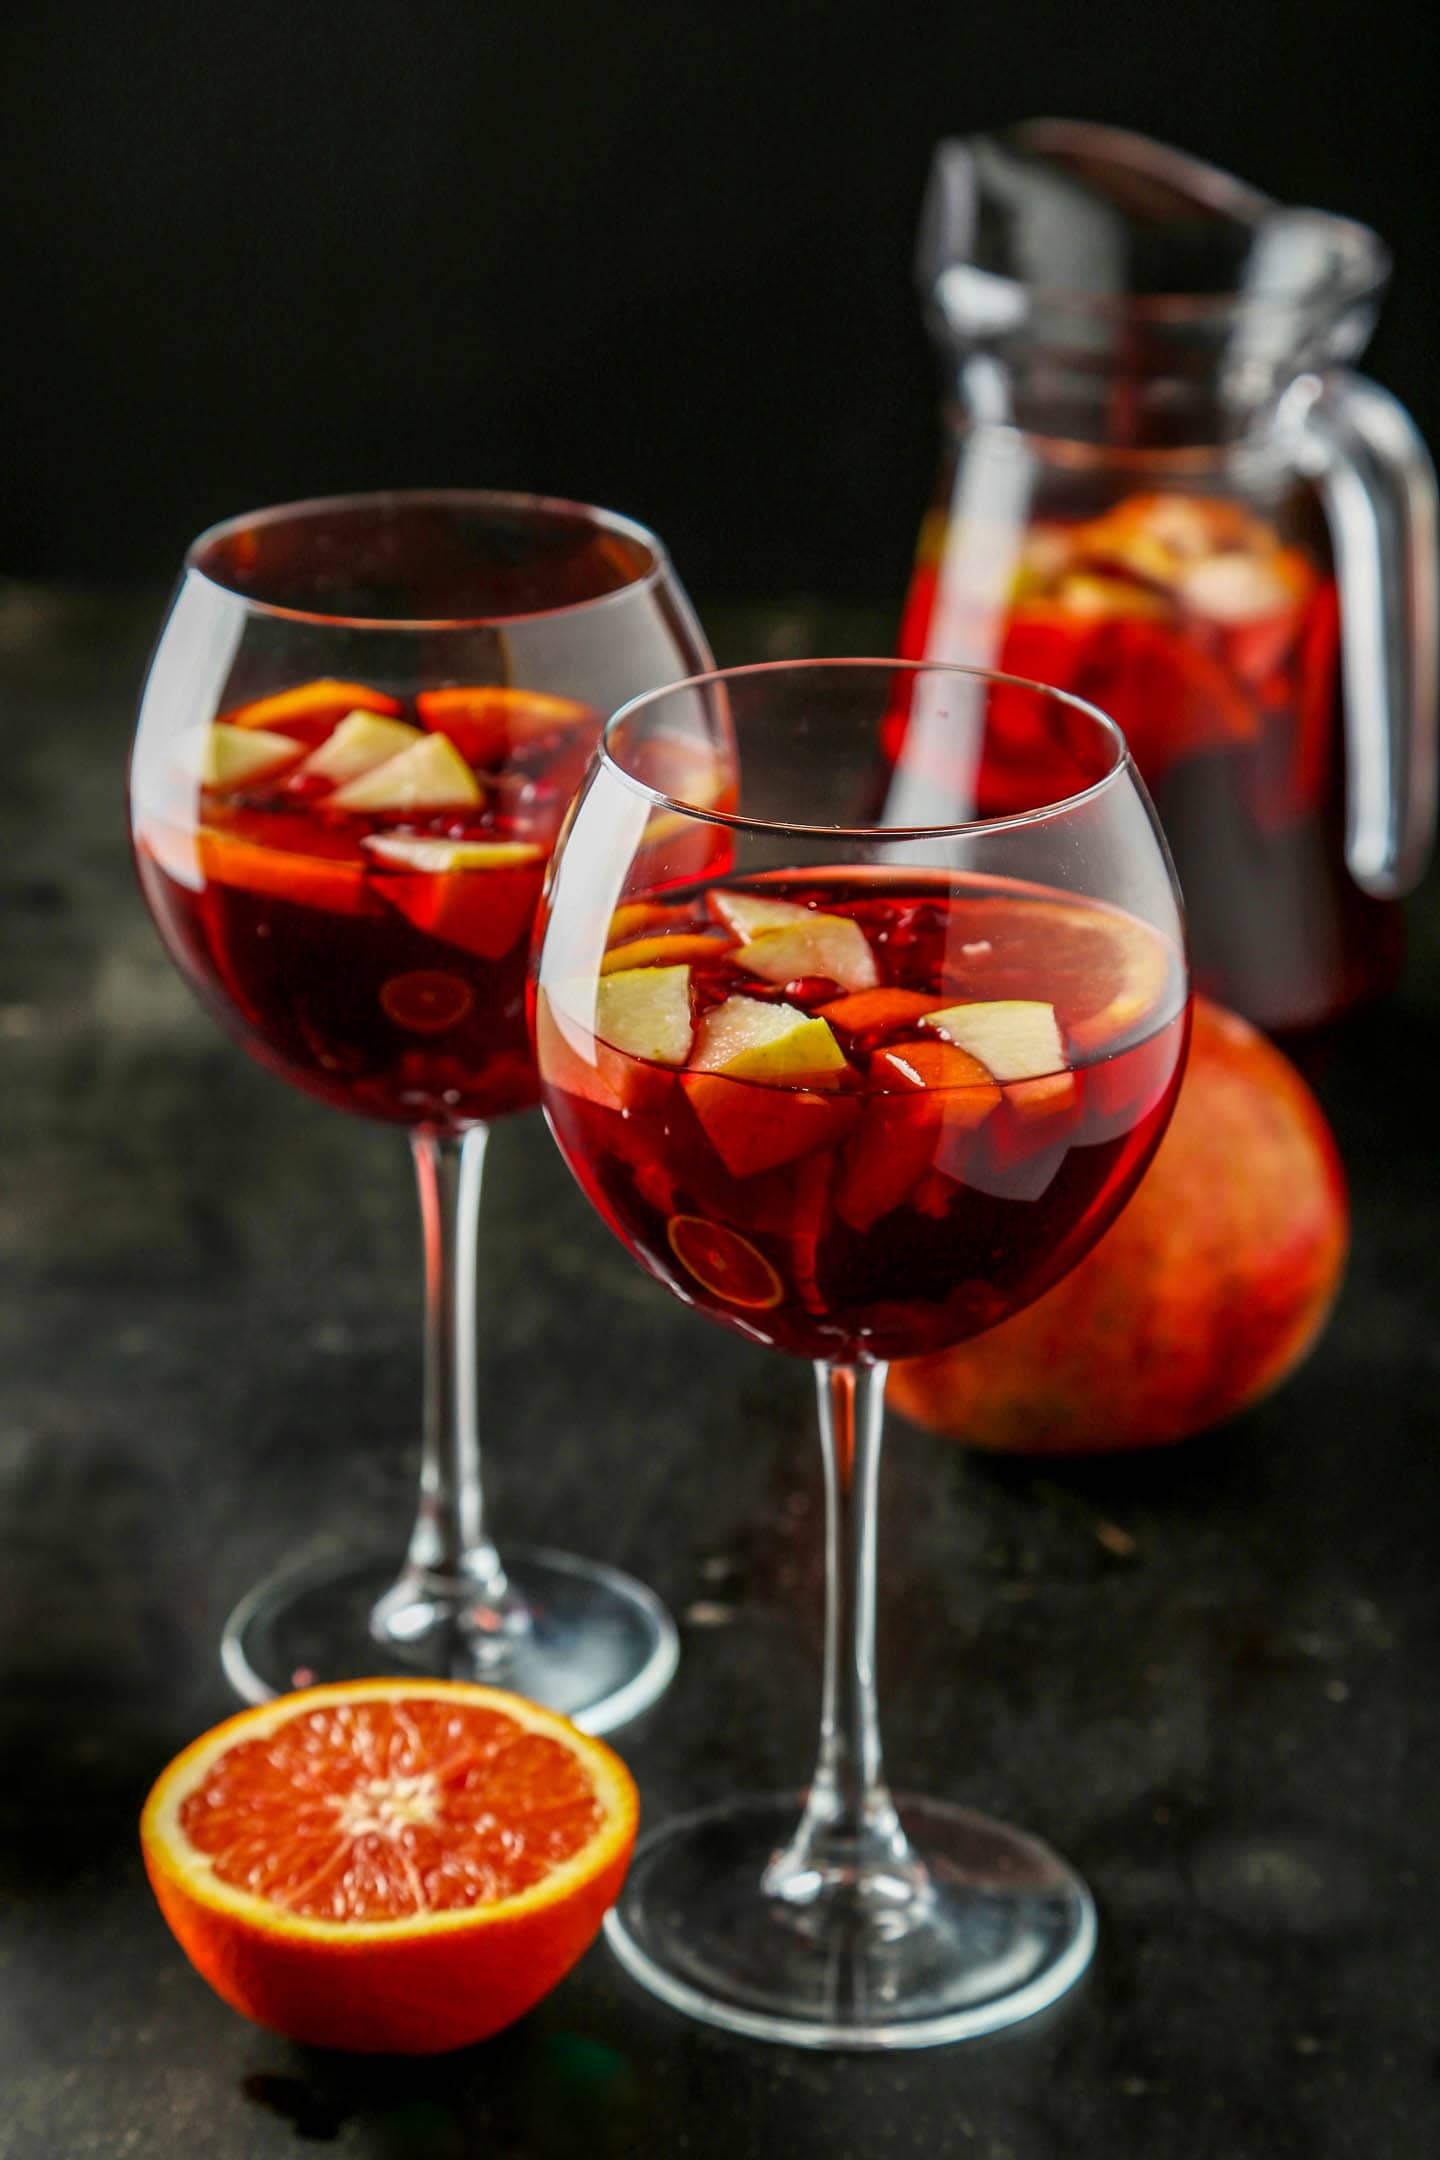 Two wine glasses filled with fruit and red wine sangria